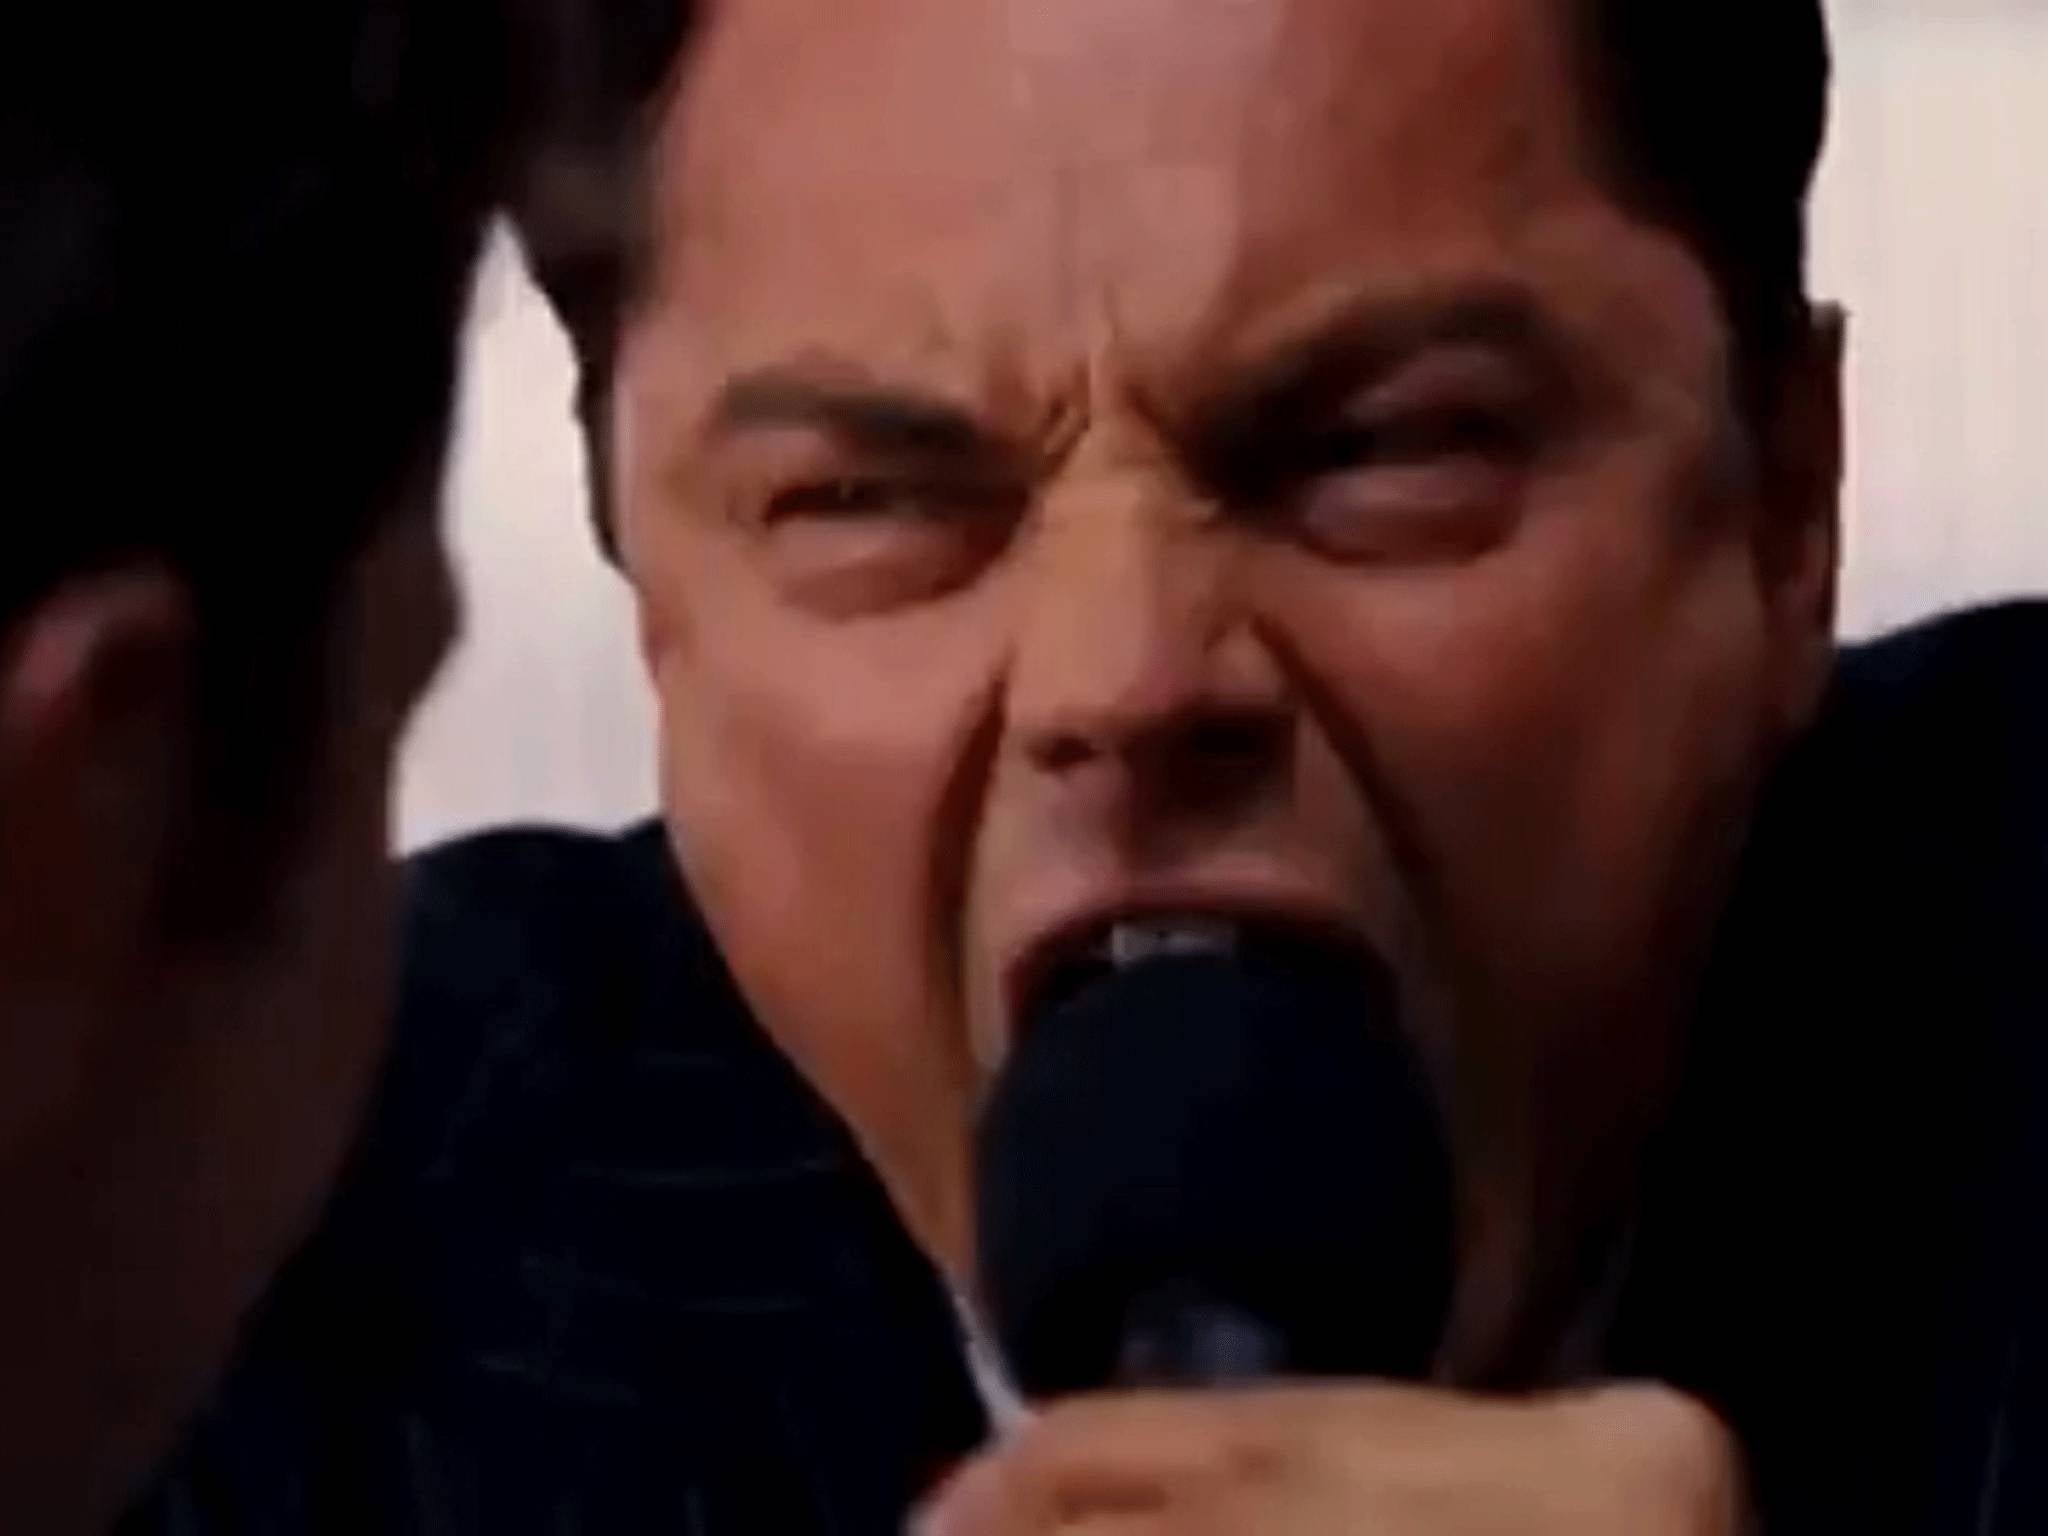 Leonardo DiCapro rallies the troops in The Wolf of Wall Street